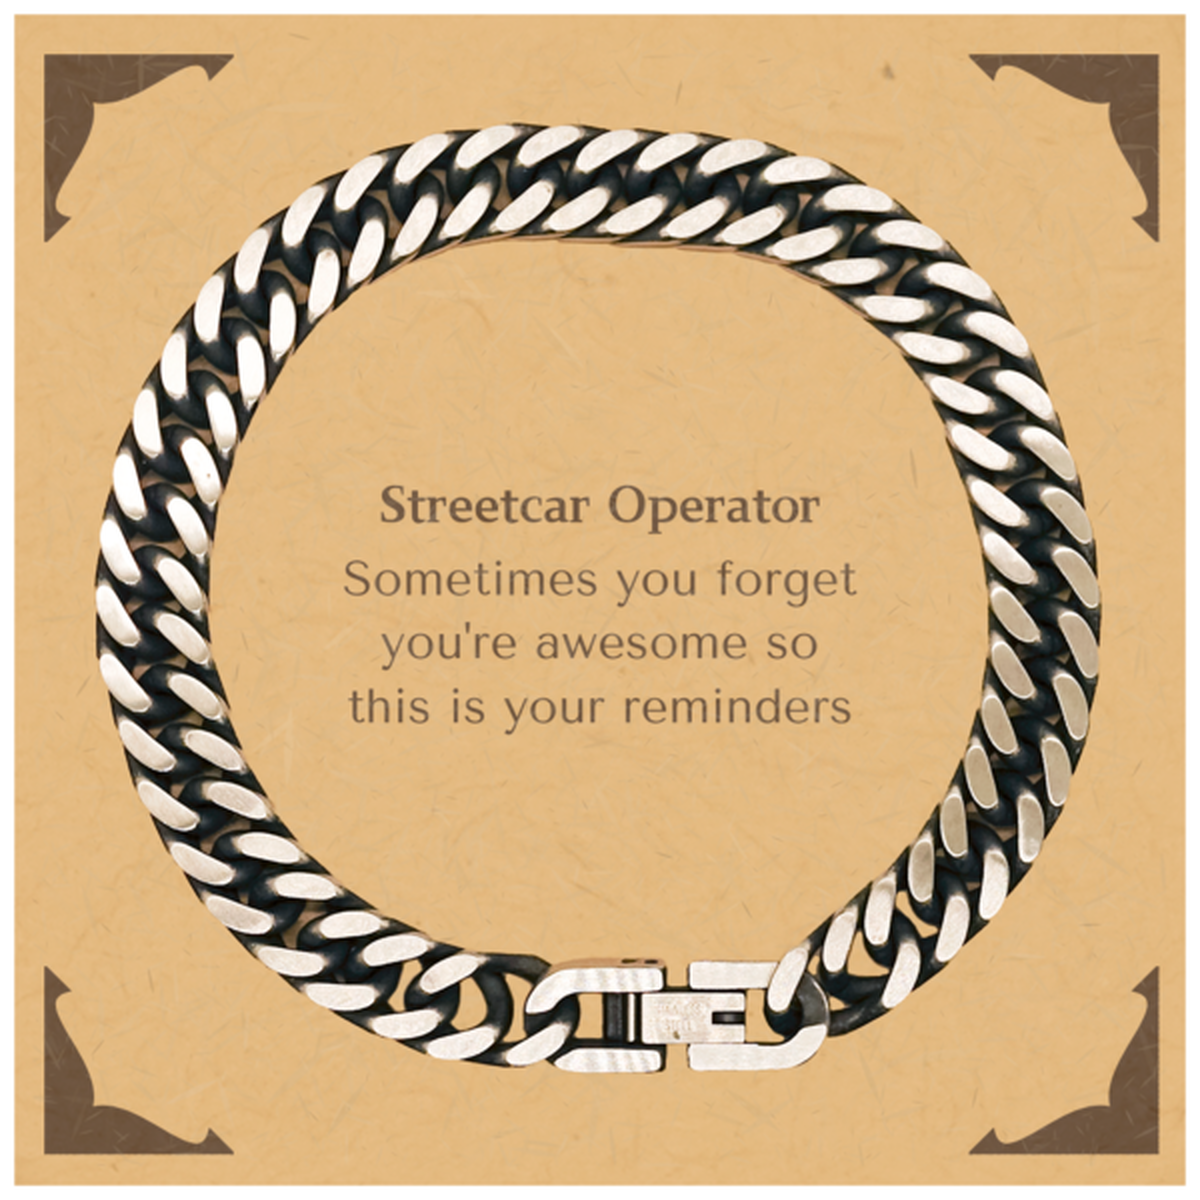 Sentimental Streetcar Operator Cuban Link Chain Bracelet, Streetcar Operator Sometimes you forget you're awesome so this is your reminders, Graduation Christmas Birthday Gifts for Streetcar Operator, Men, Women, Coworkers